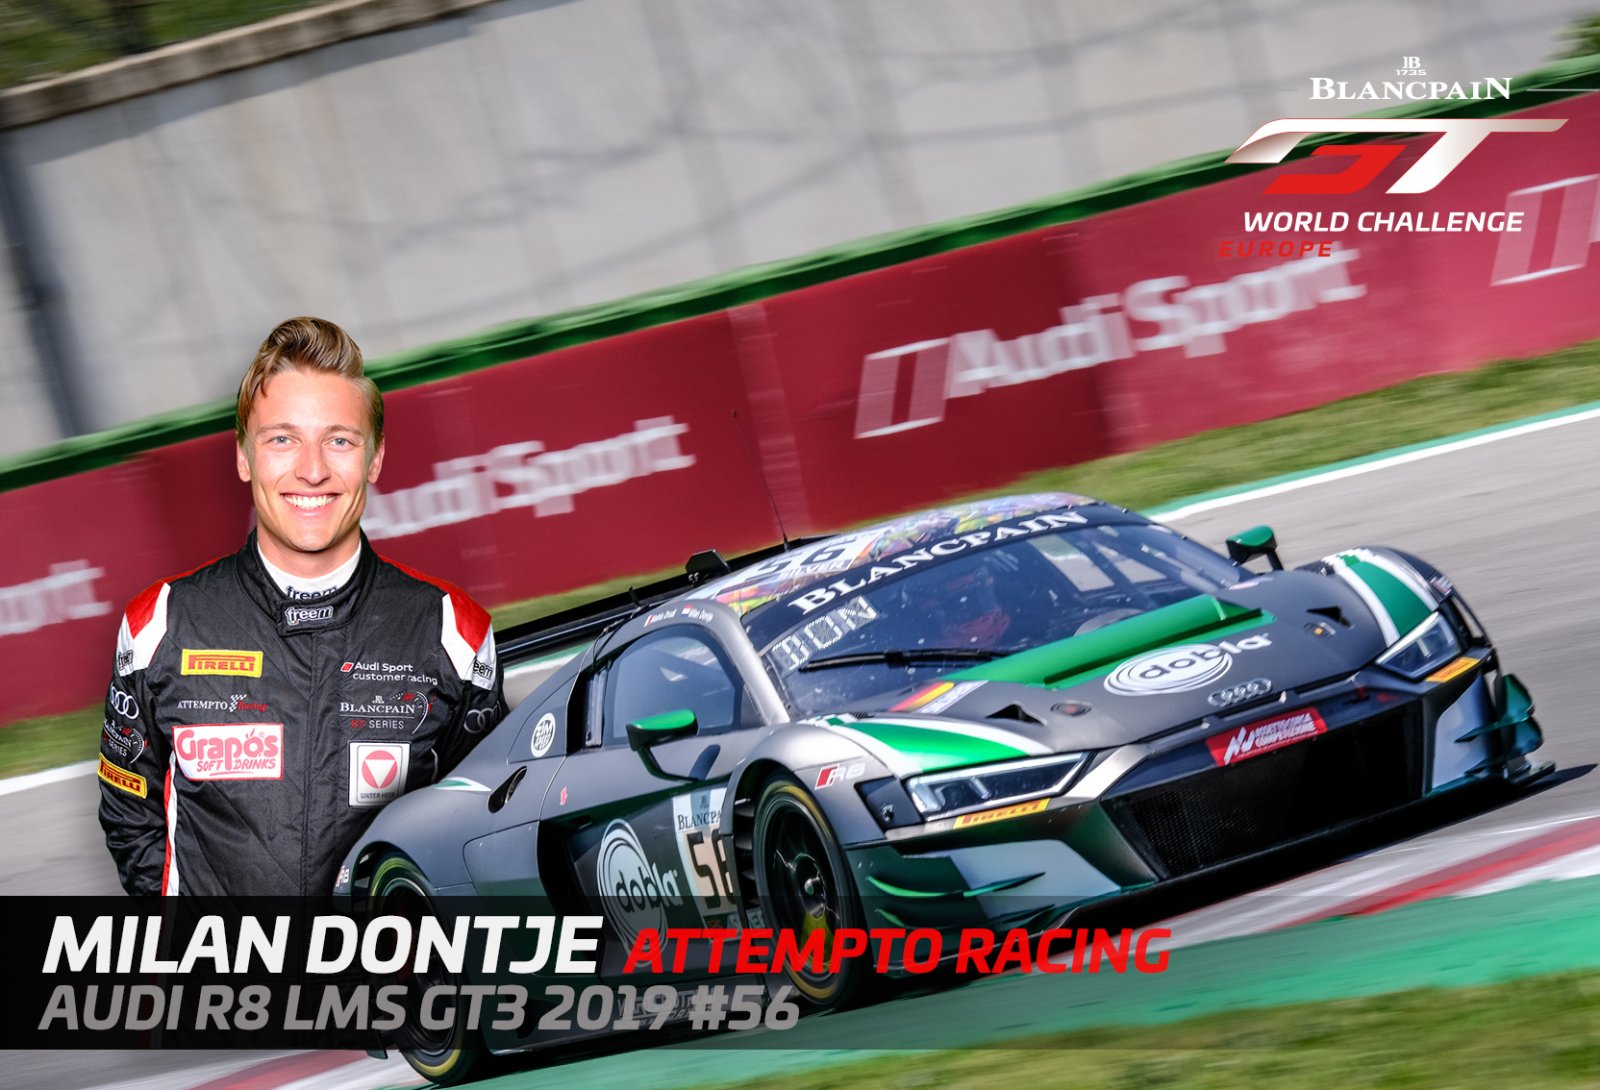 In Profile: Milan Dontje, the new kid on the block at old-school Zandvoort